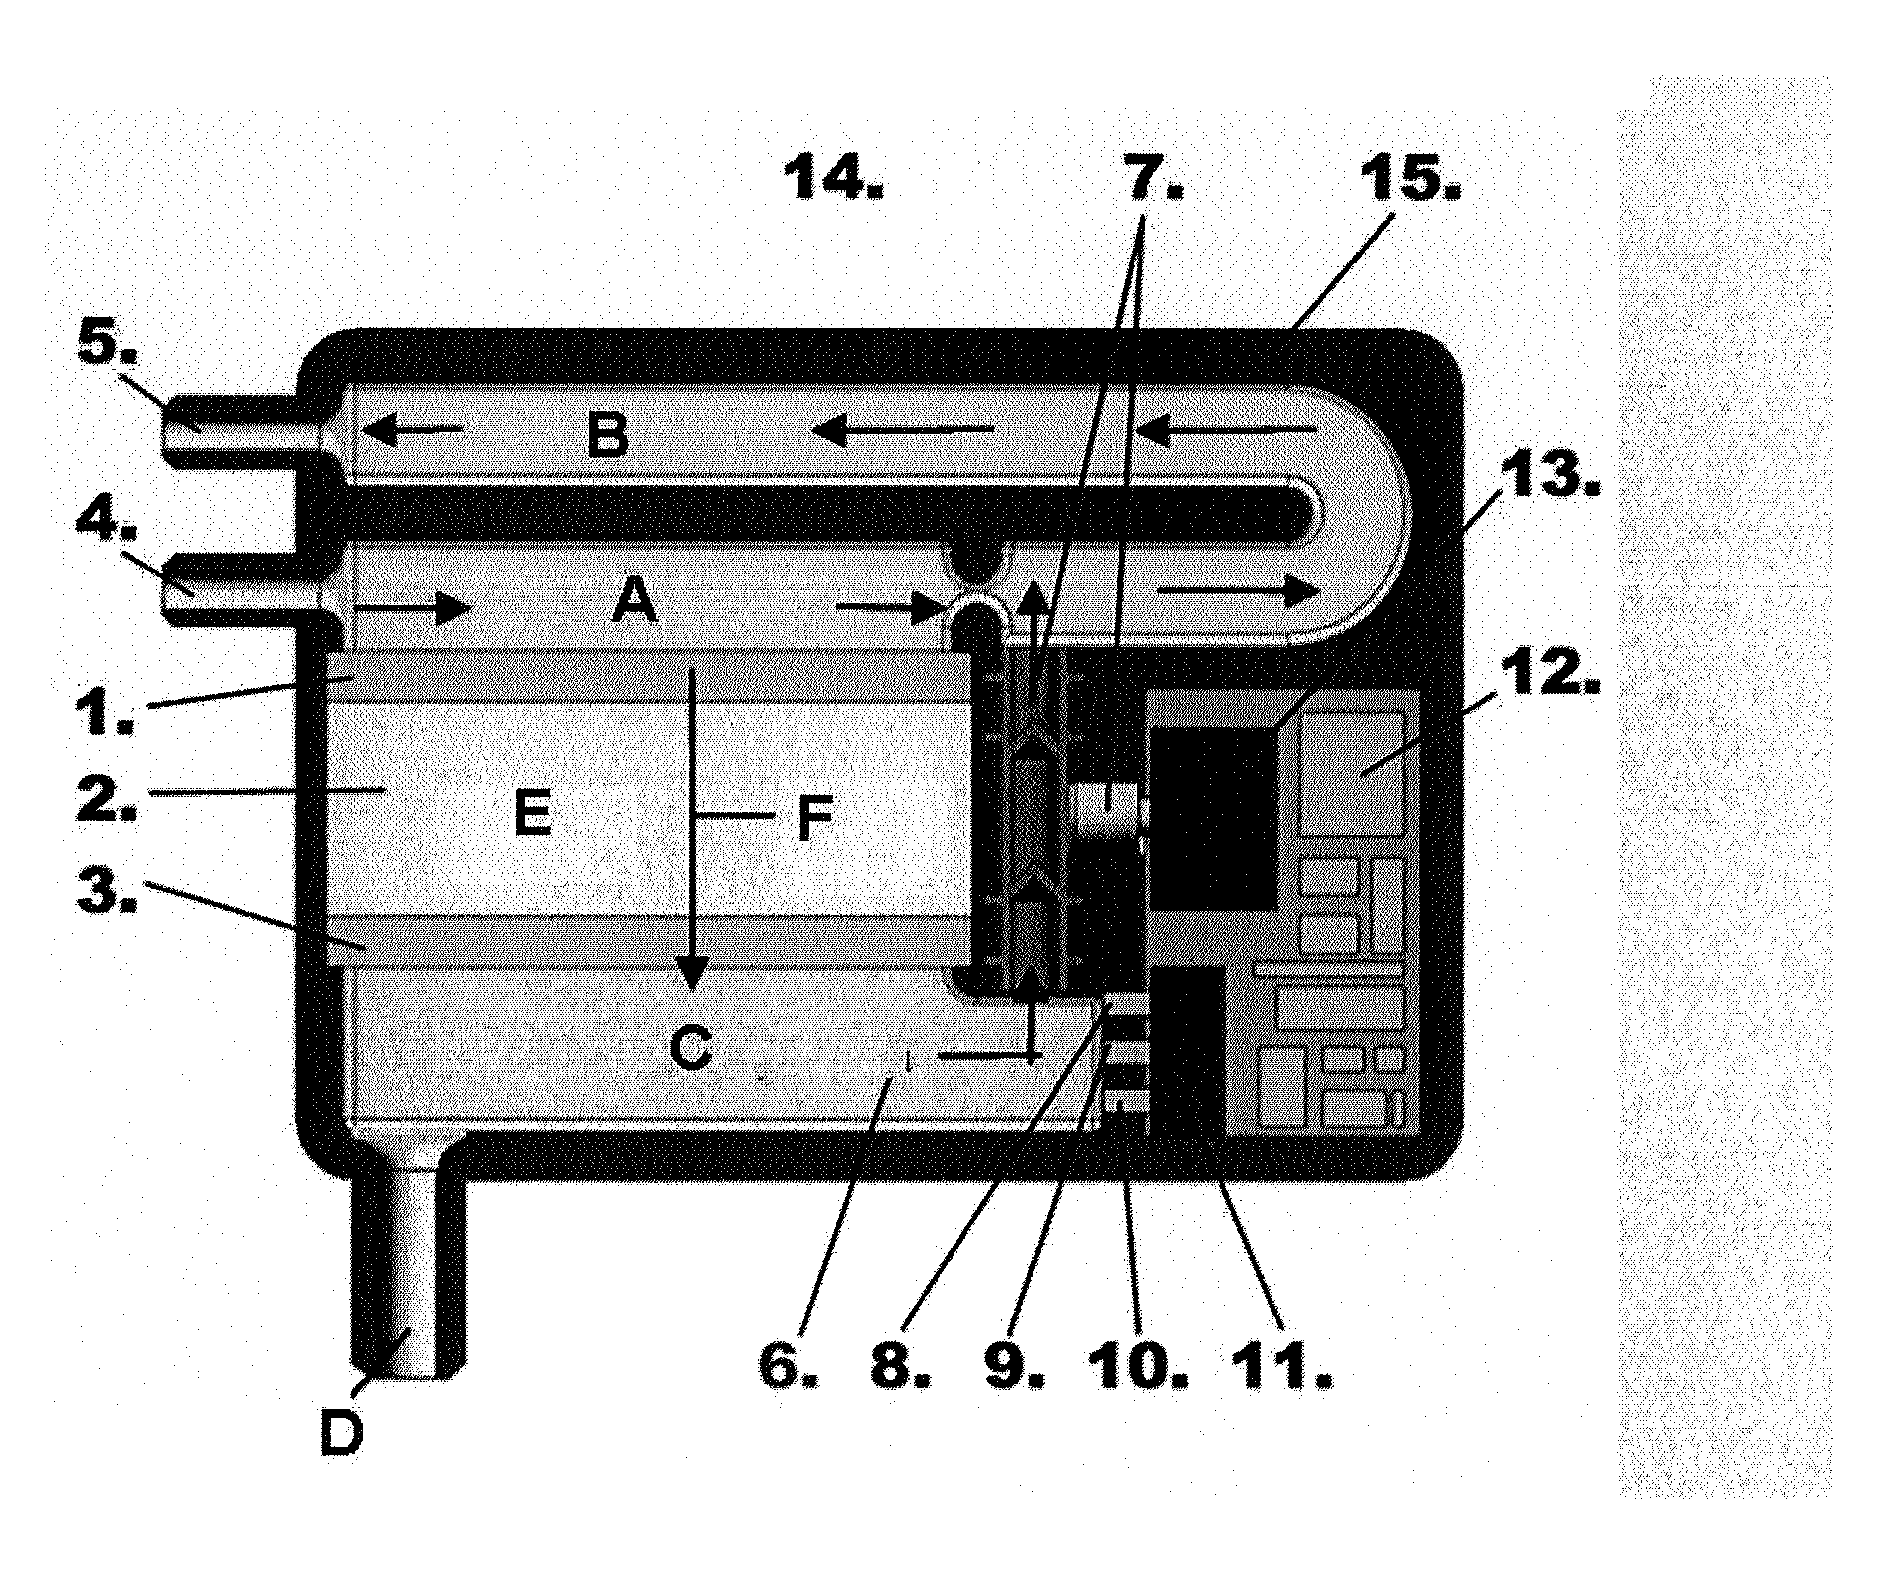 Device for the removal of toxic substances from blood